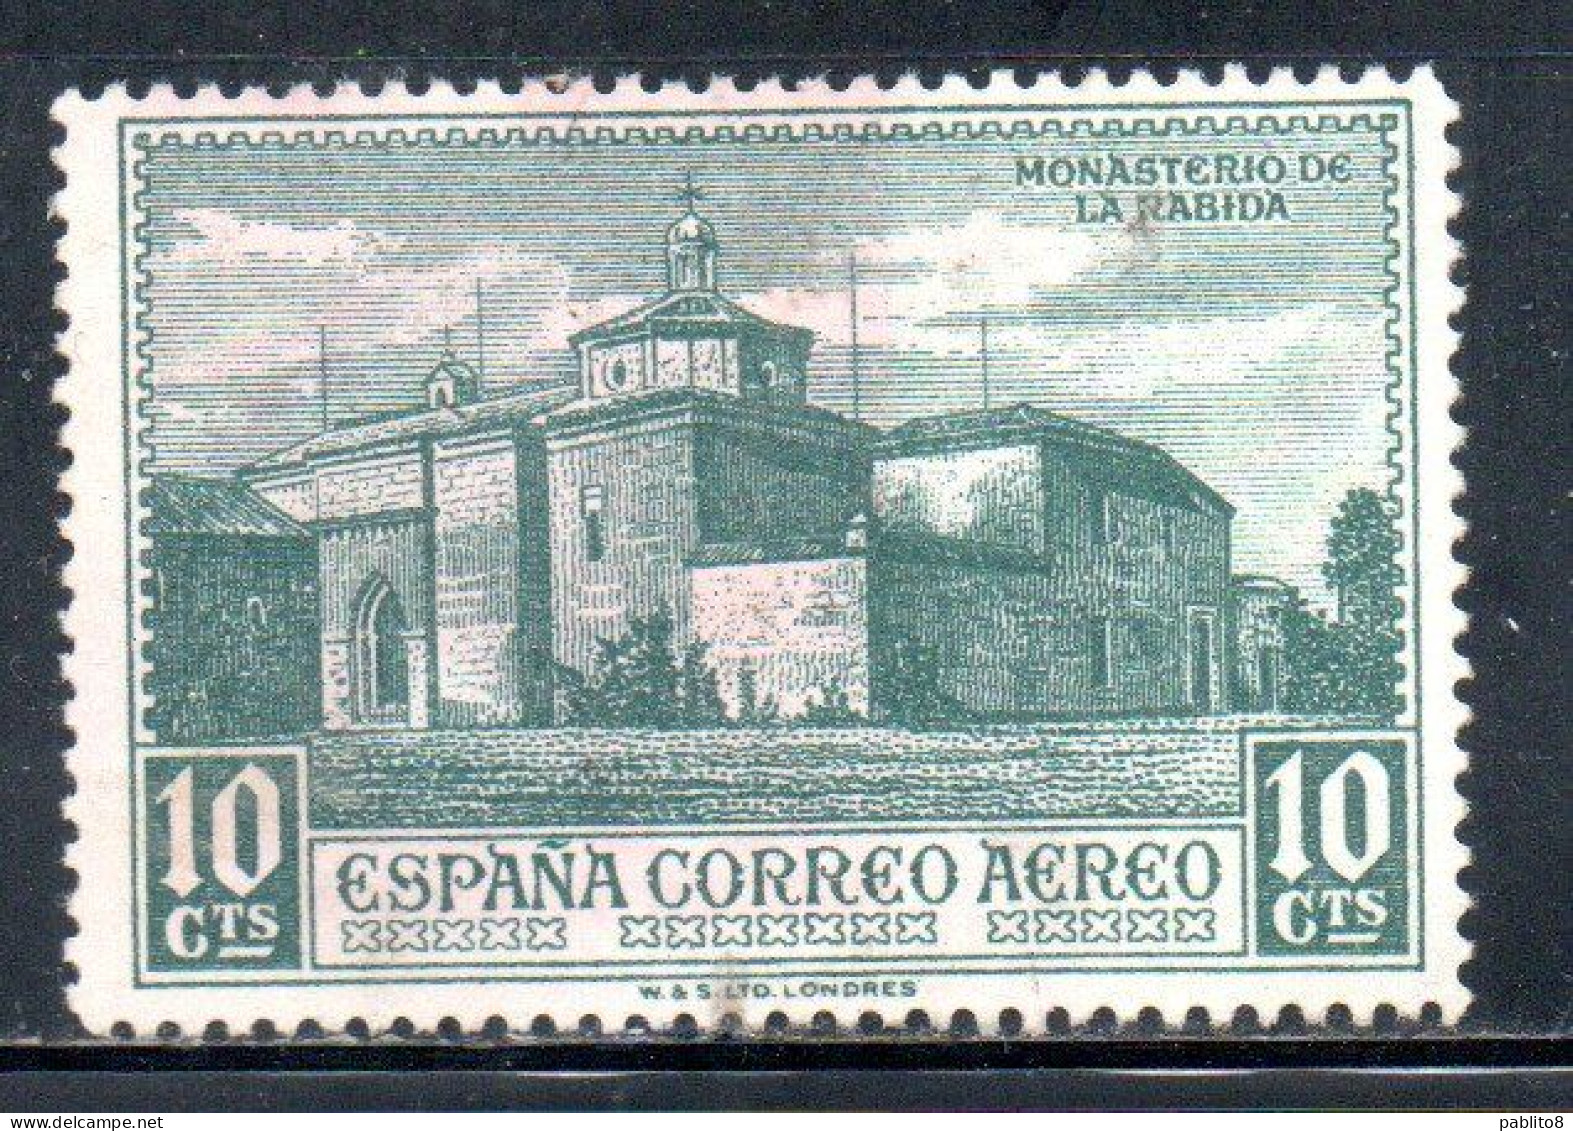 SPAIN ESPAÑA SPAGNA 1930 AIR POST MAIL AIRMAIL CHRISTOPHER COLUMBUS ISSUE LA RABYDA MONASTER  10c MLH - Unused Stamps